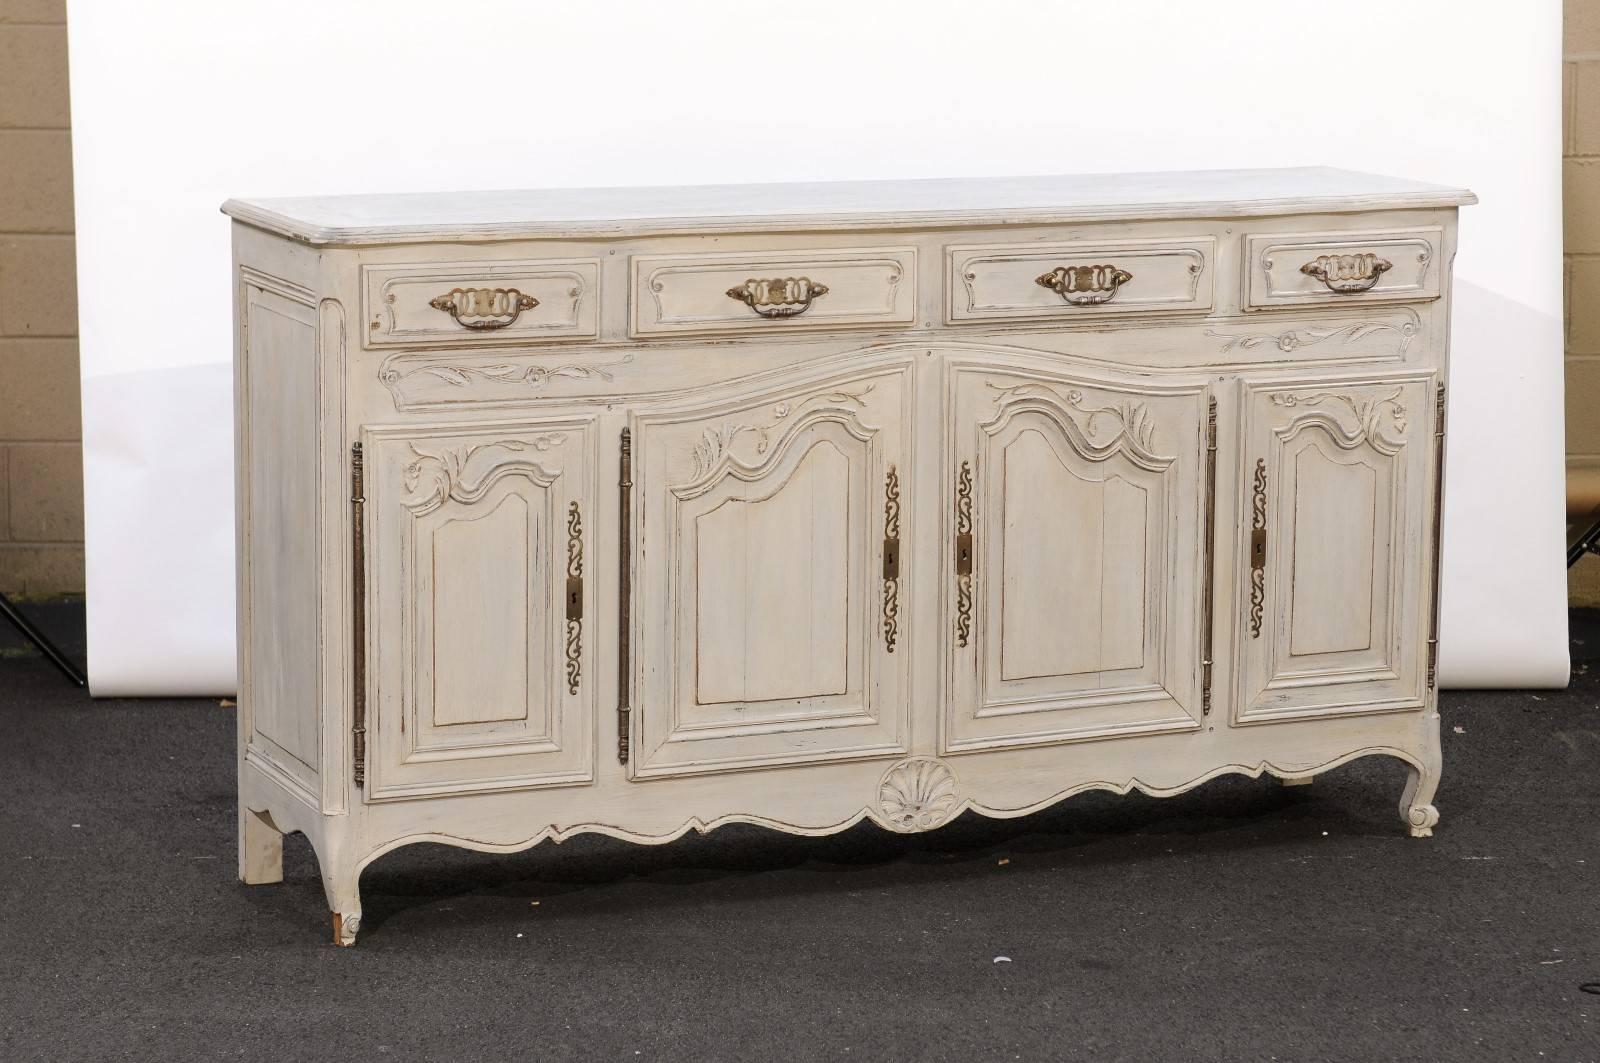 This French Louis XV style painted wood enfilade features a light color finish and four drawers over four doors decorated with delicately carved foliage motifs. The sinuous lines of the central panels echo the nice scalloping of the skirt, adorned